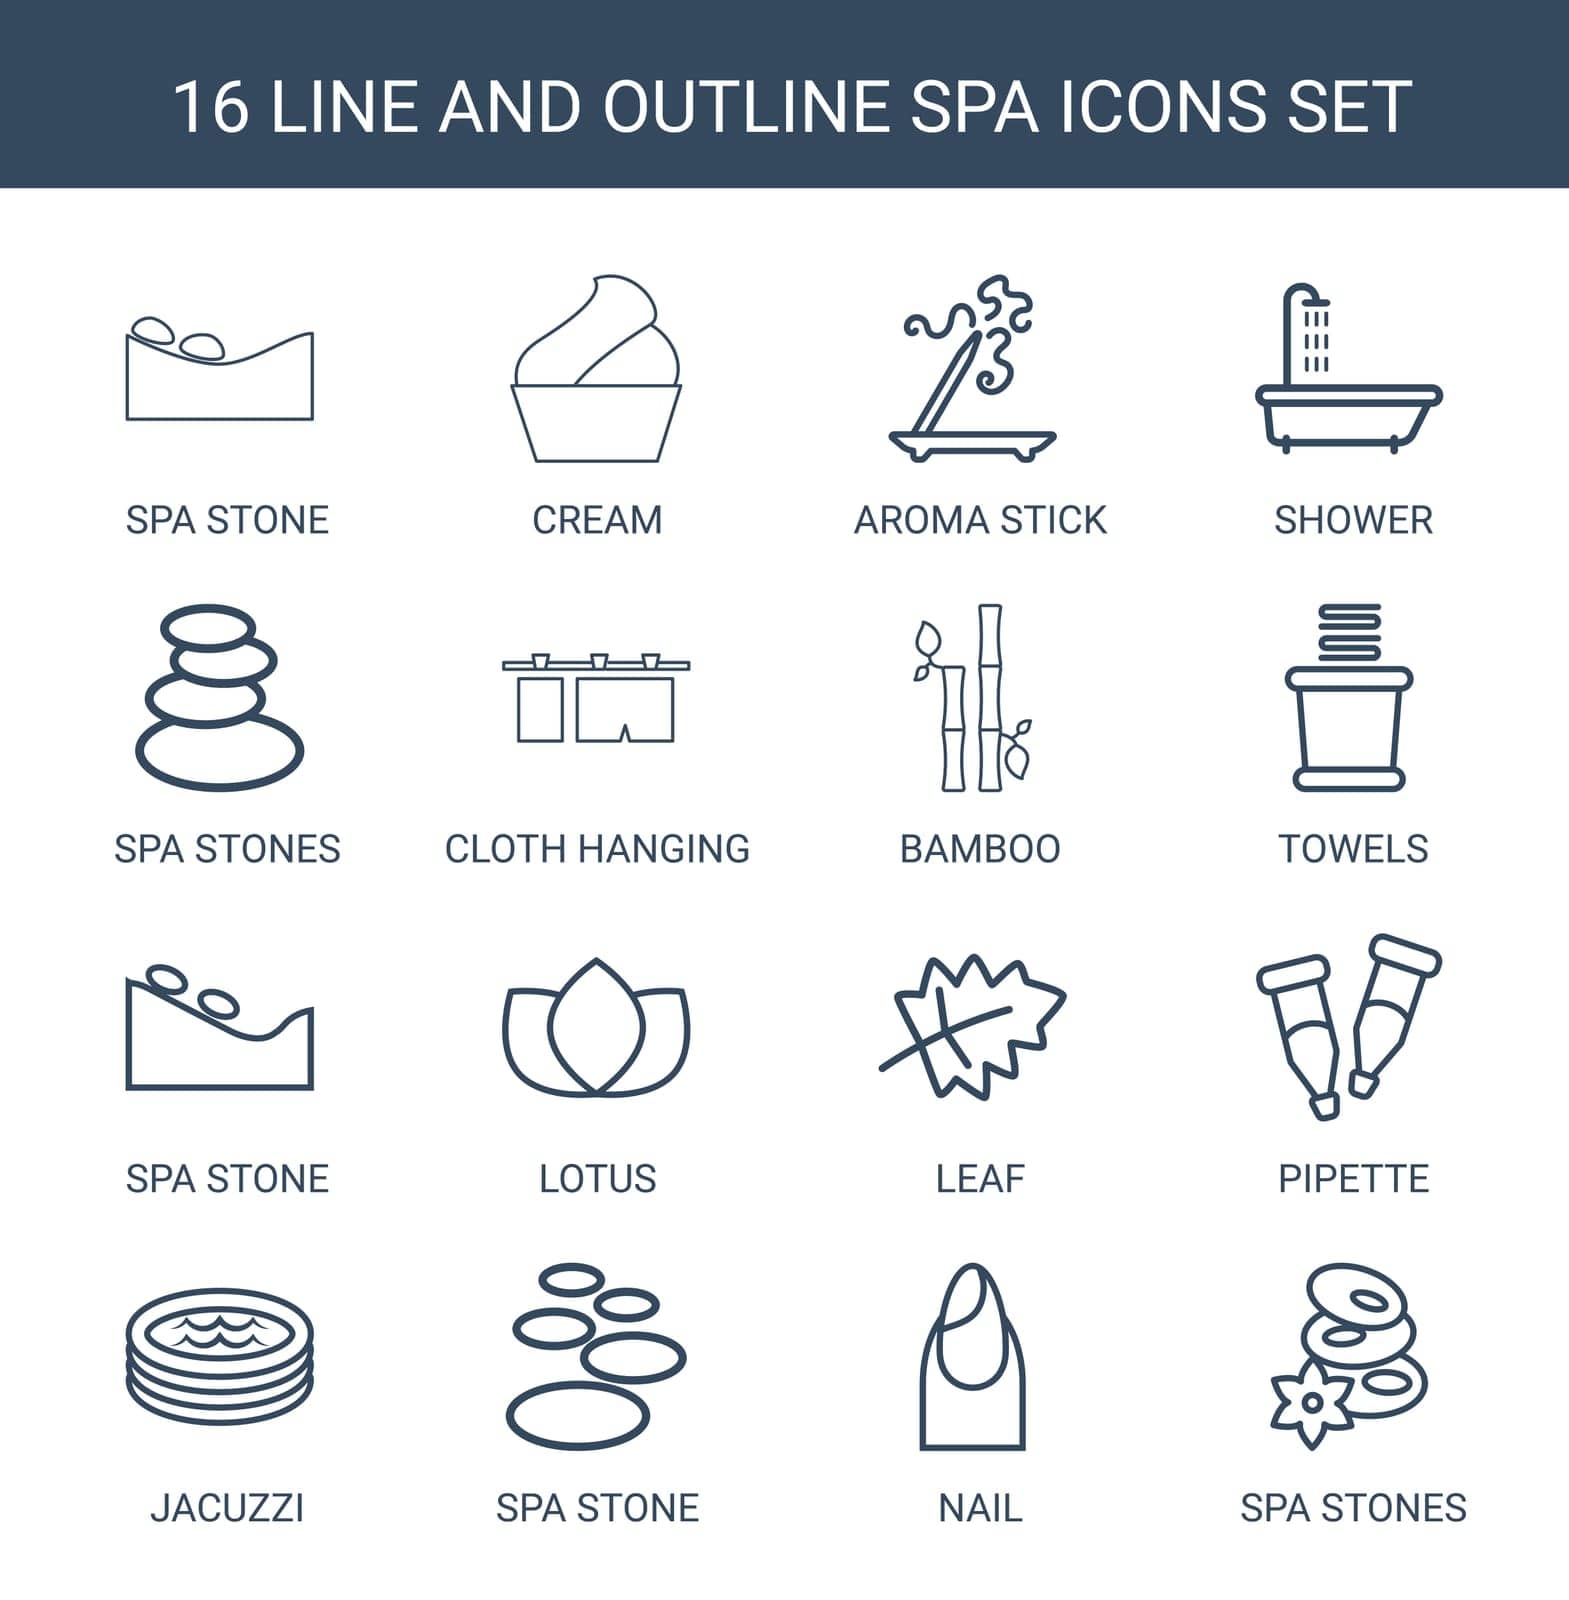 shower,symbol,beauty,concept,icon,sign,isolated,lotus,beautiful,white,towels,hygiene,design,stick,vector,graphic,bathroom,set,natural,jacuzzi,nature,spa,nail,relaxation,black,health,cream,abstract,leaf,clean,stone,bamboo,background,healthy,pipette,stones,illustration,hanging,aroma,care,cloth by ogqcorp